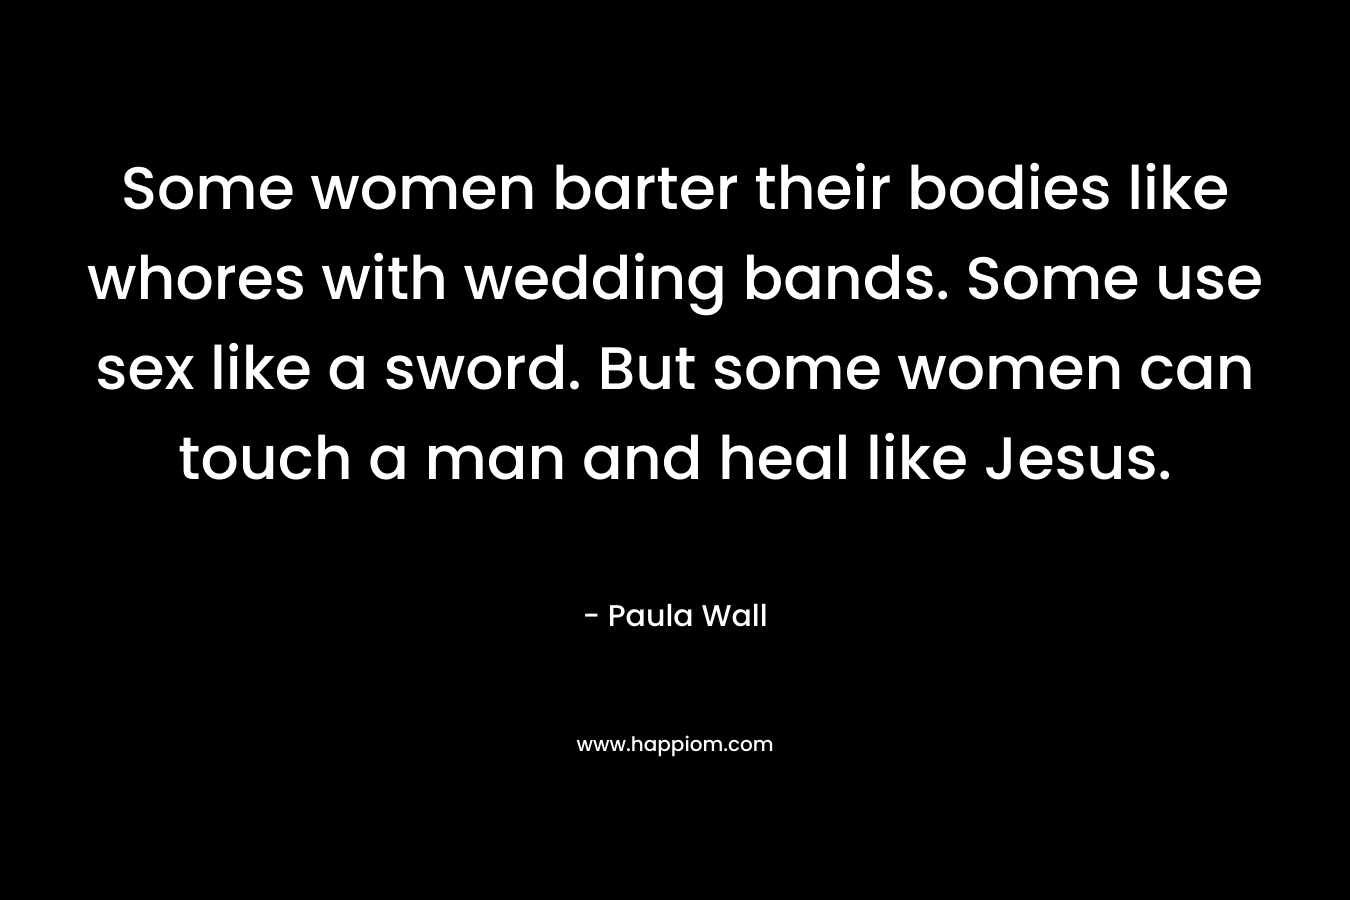 Some women barter their bodies like whores with wedding bands. Some use sex like a sword. But some women can touch a man and heal like Jesus.